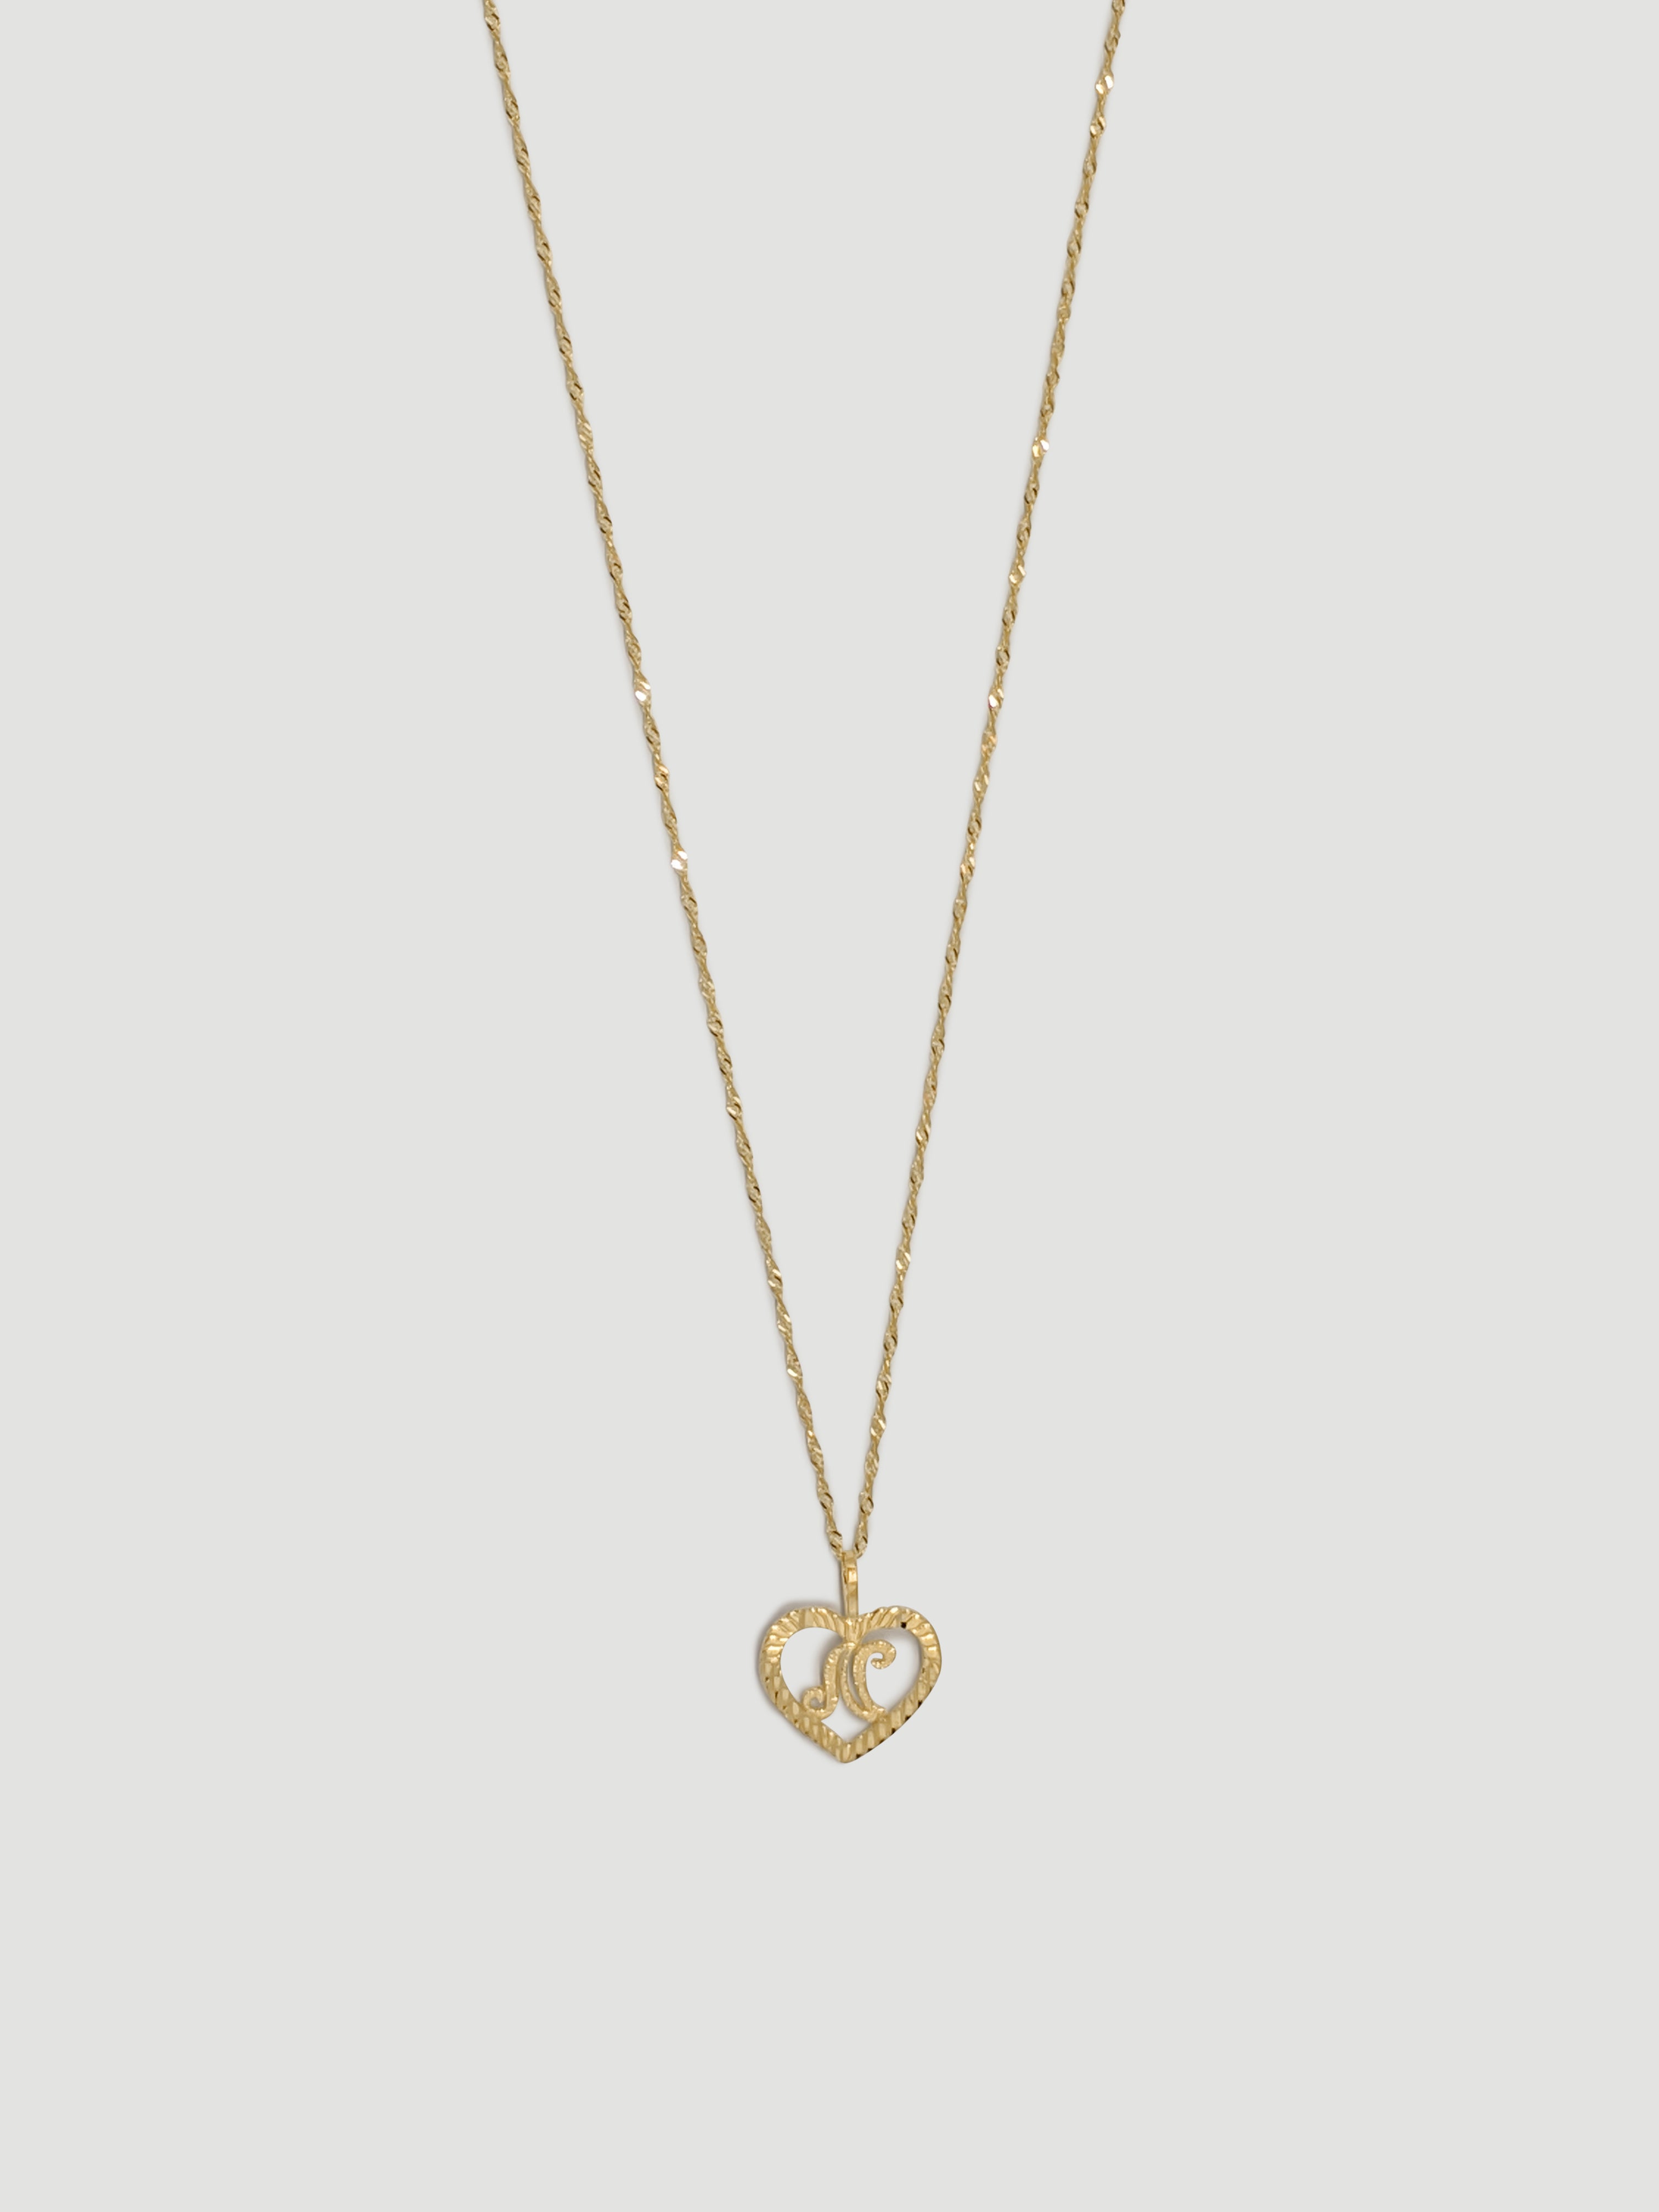 14K Solid Gold Heart Necklace , Heart Name Necklace, Love Necklace  ,Minimalist Heart Necklace,Valentines Day Gift ,Lover Gift ,Gift for her